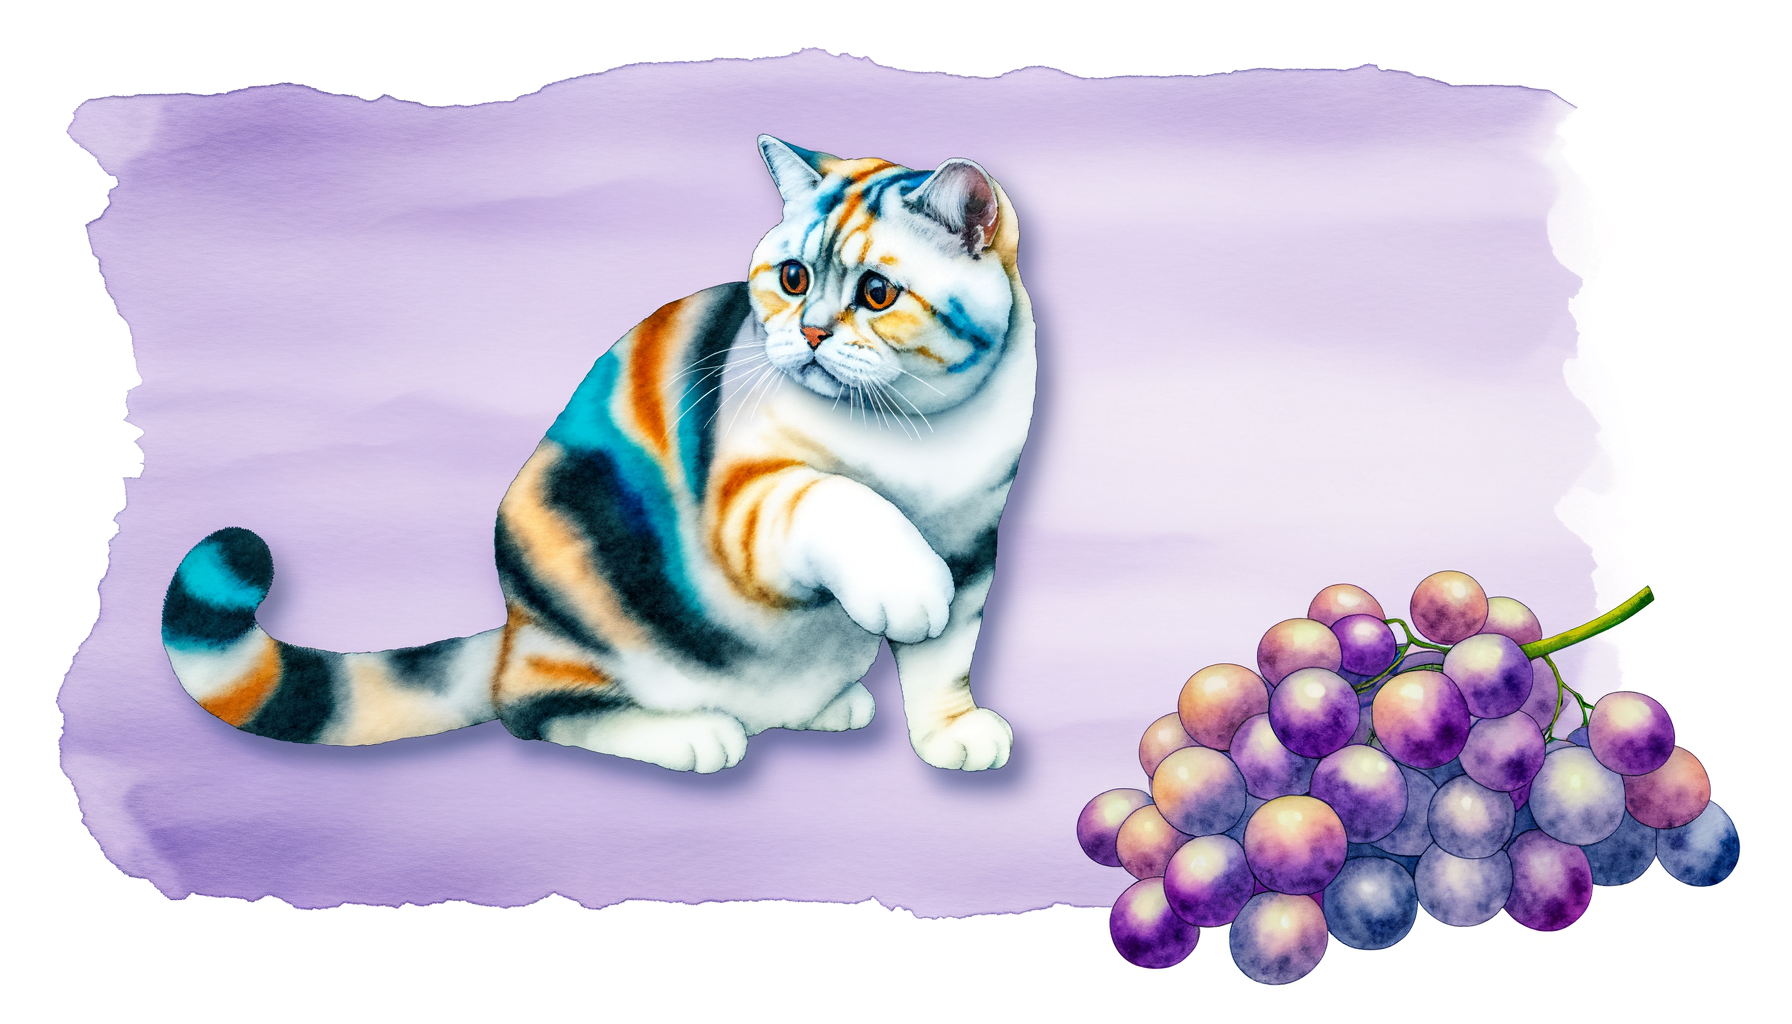 "Understanding Feline Diets: The Truth About Cats and Grapes"